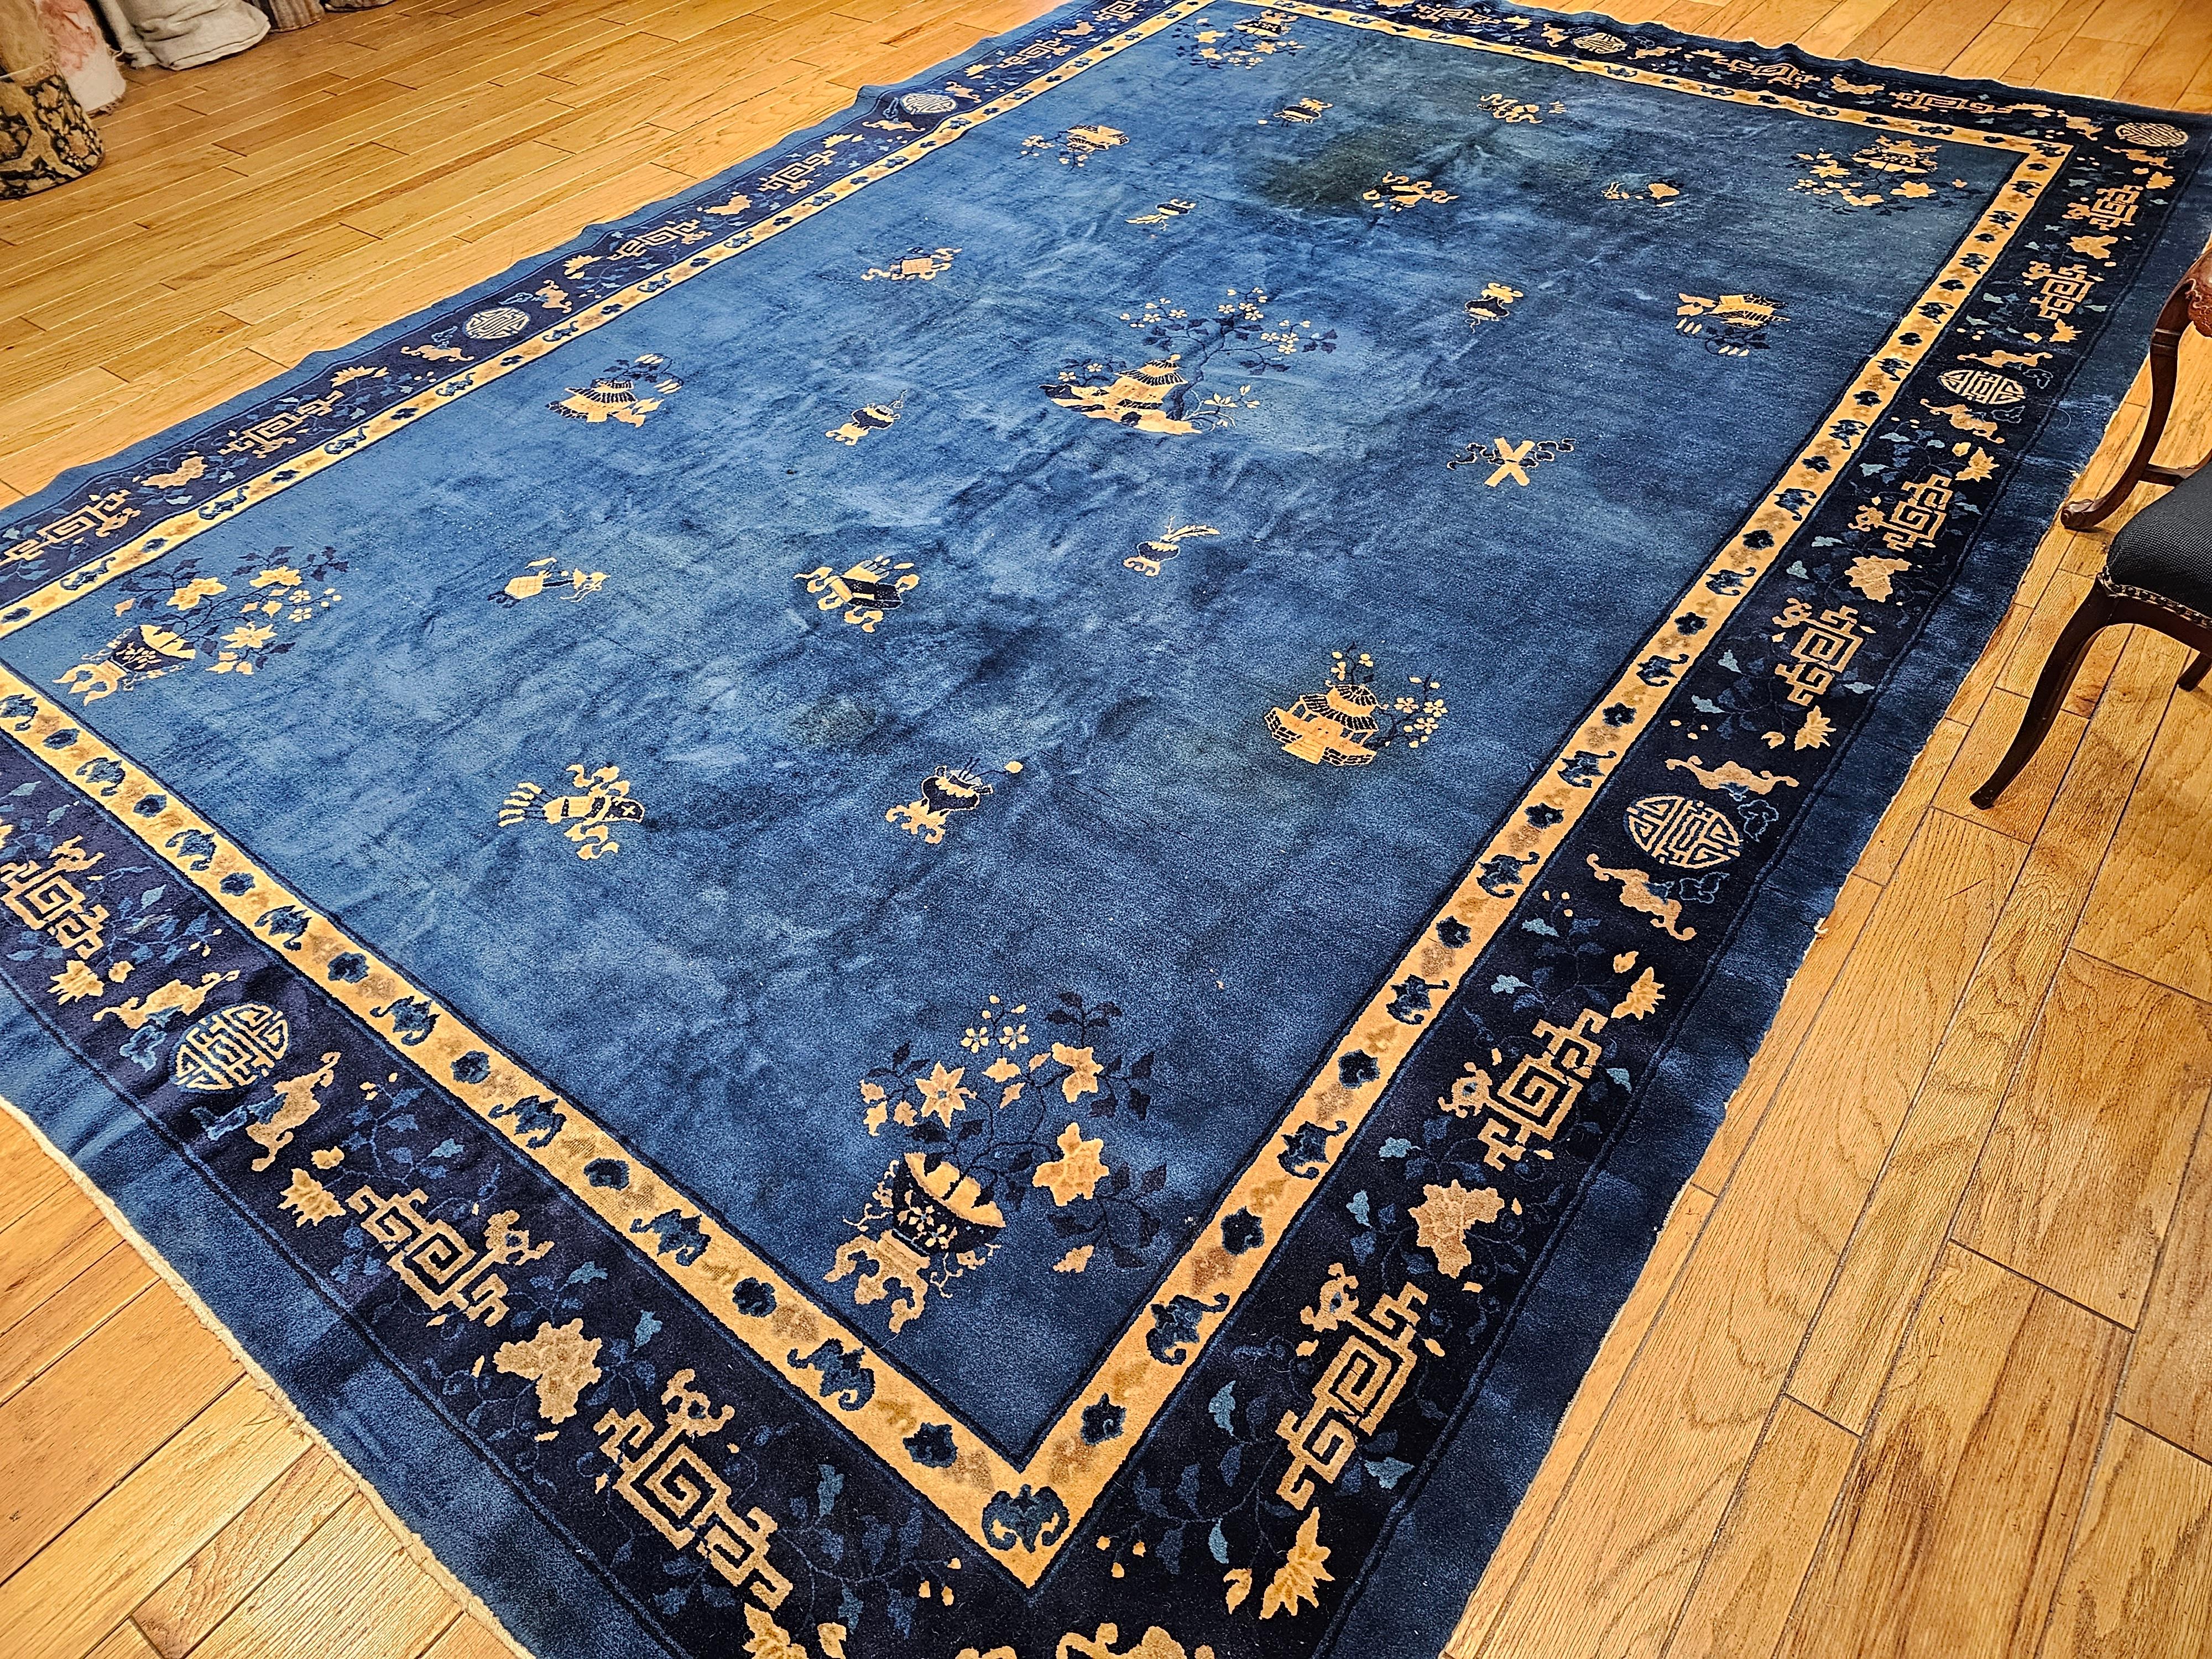 Vintage Art Deco Chinese Rug with Auspicious Symbols in Royal Blue, Navy, Camel For Sale 4